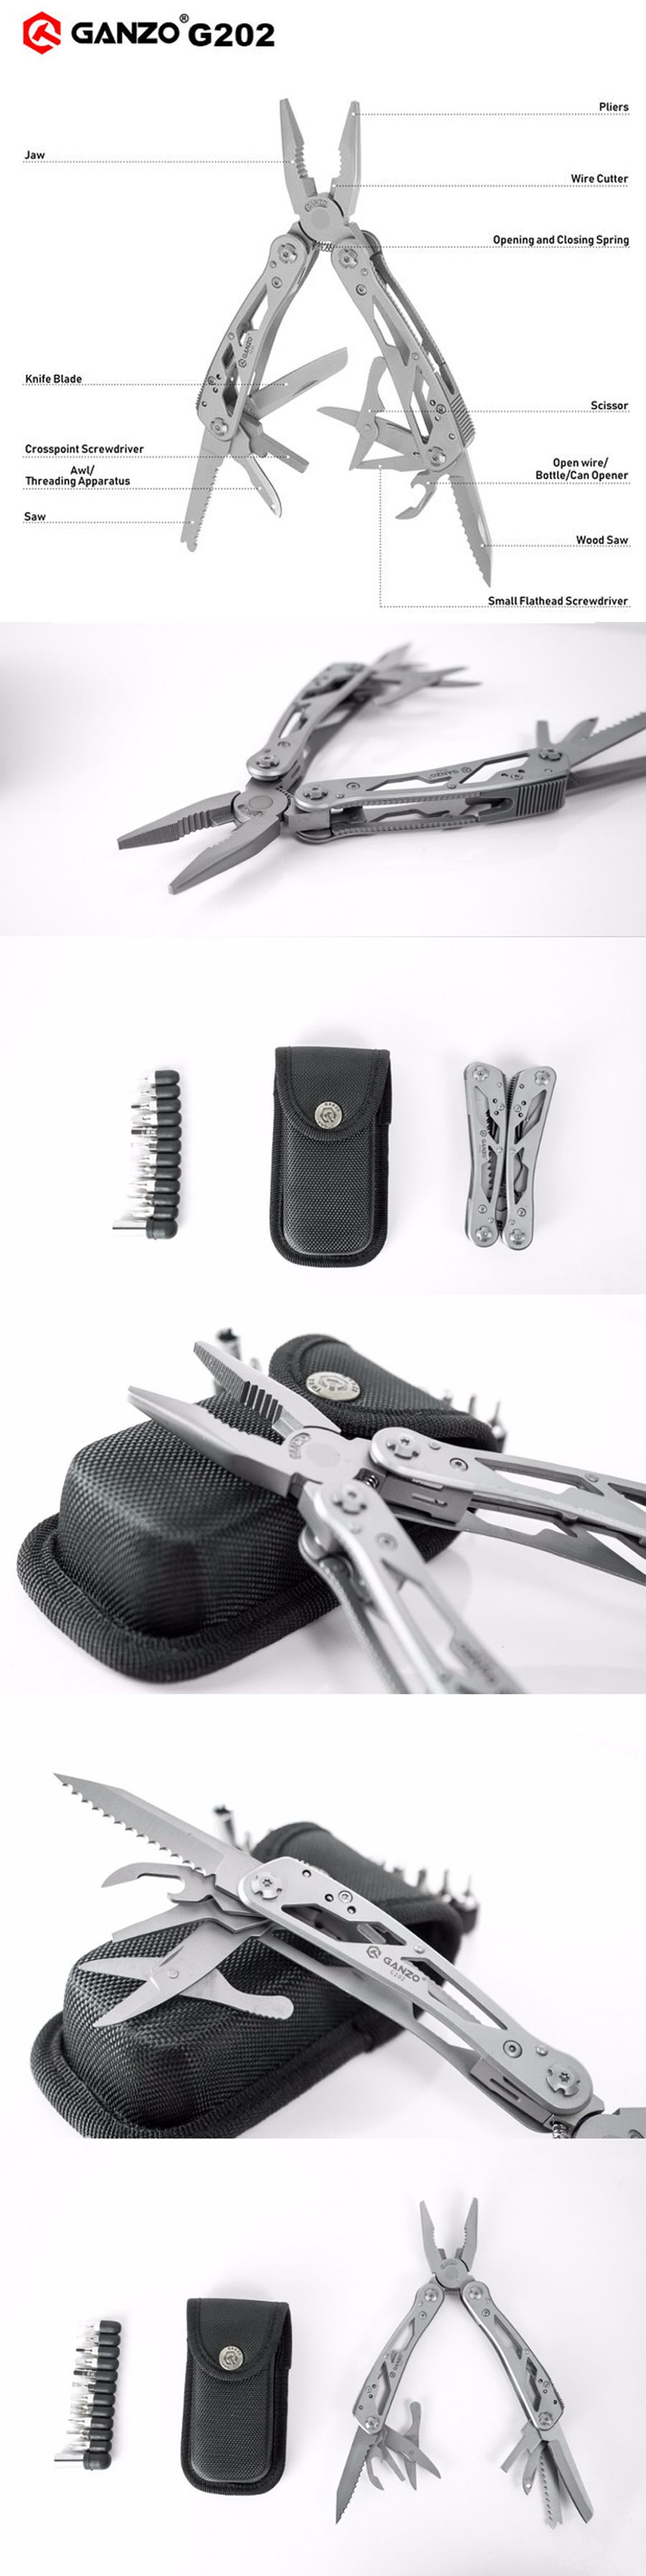 GANZO-G202-24-in-1-EDC-Multitools-Survival-Tool-Kit-Folding-Hand-Knife-Portable-Plier-Clamp-Wire-Str-1732905